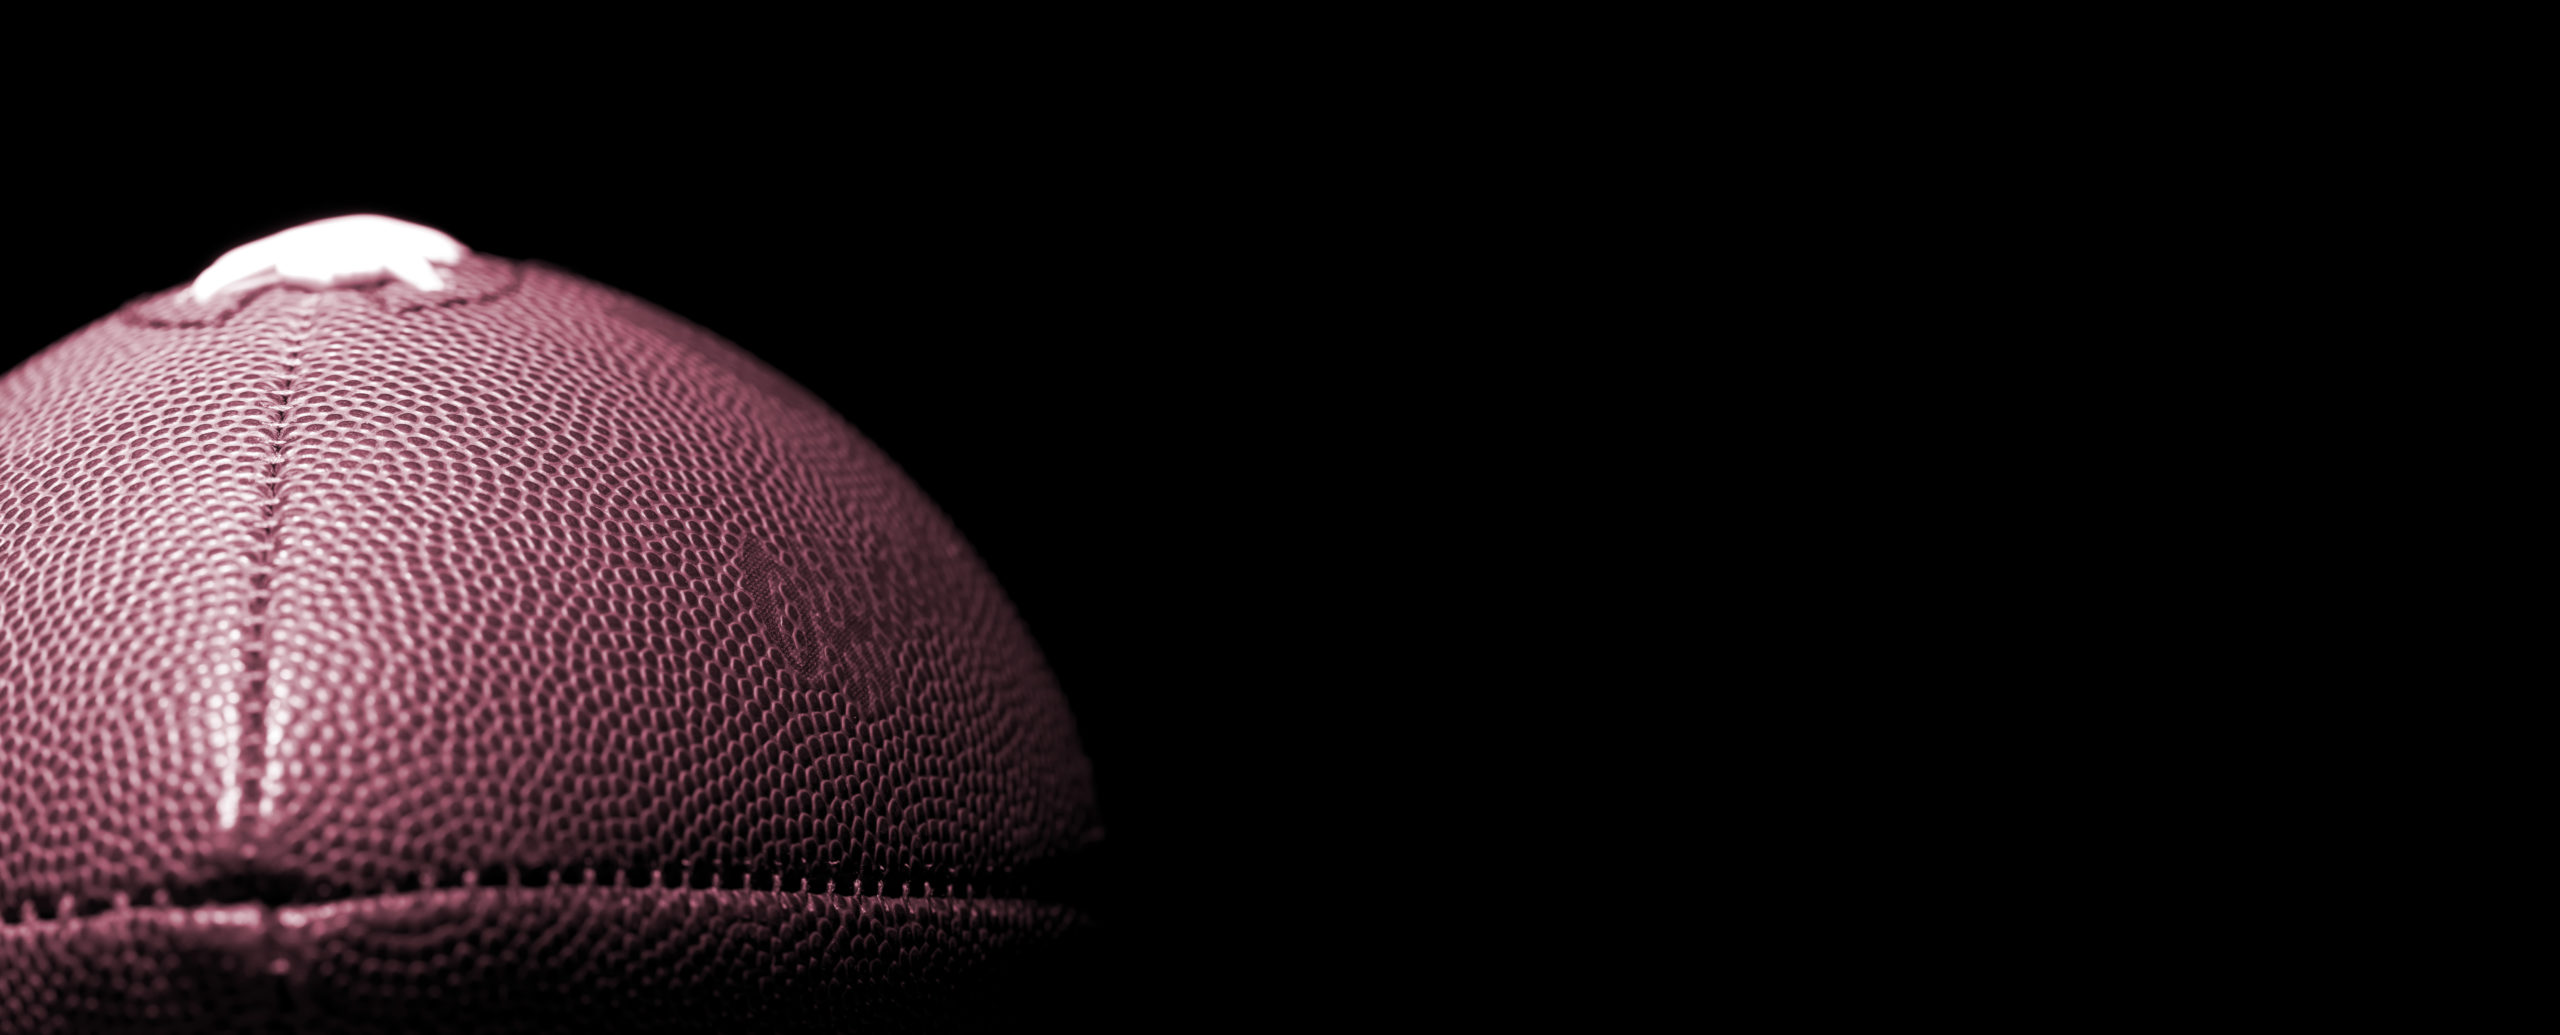 Bet on Super Bowl slots right with Pigskin Payout at Bodog